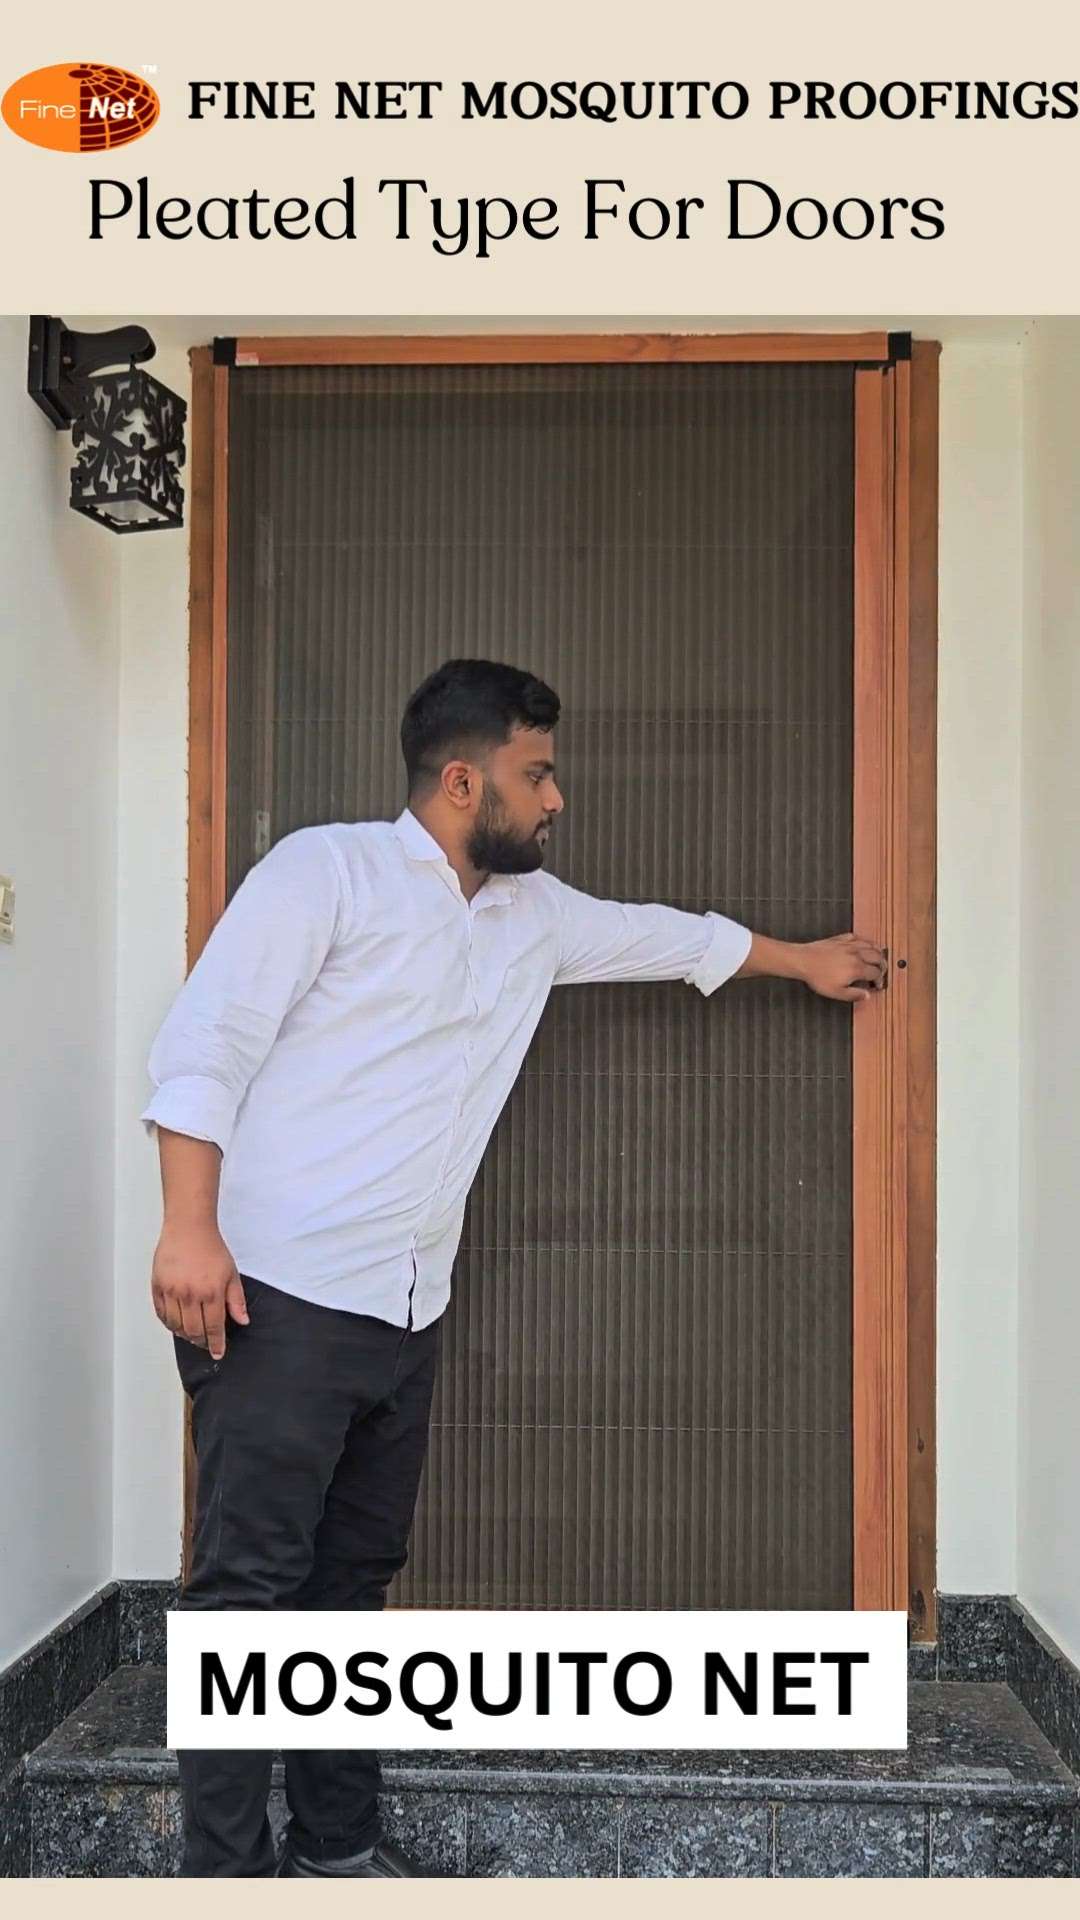 MOSQUITO NET 
Model: Pleated Type
Mosquito net for Doors, Windows, Balconies, and any other openings. Made with Durable and Quality materials only. Also available in Single, Double, and Triple Shutters.

Contact: +91 9847845470
Email:- finenet2424@gmail.com

 #mosquito  #mosquitonet  #mosquito_mesh  #mosquitodoor  #mosquitowindow  #mosquitocontrol  #insectscreens  #insect_screen #pleated_mesh